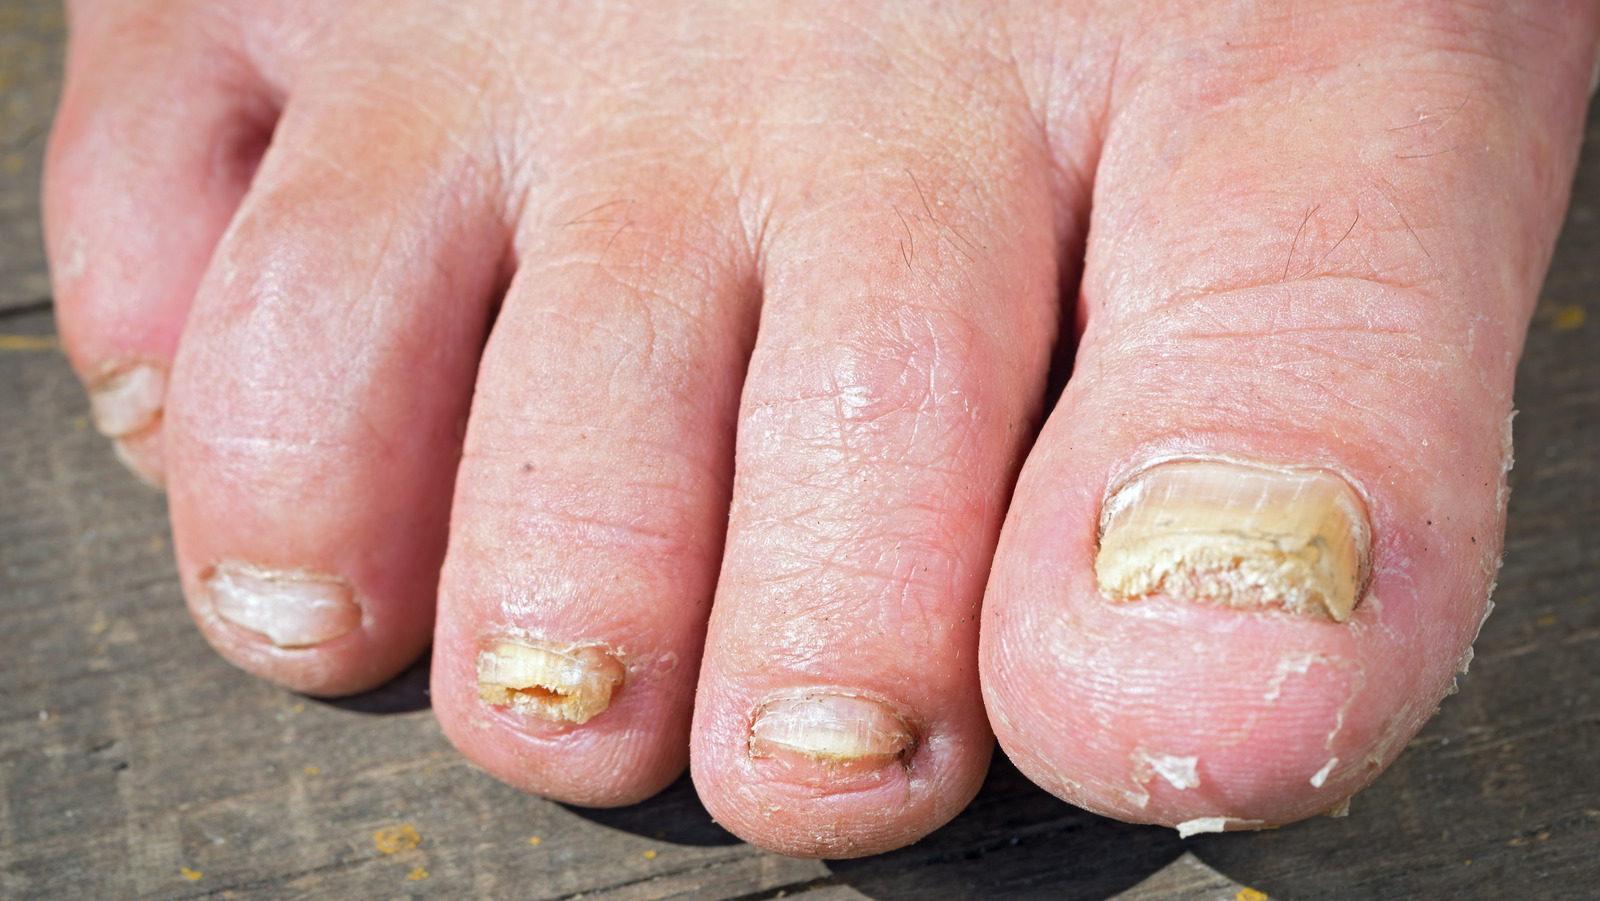 Fungal Toenail Specialist in Quincy MA | Foot Care Specialists, PC